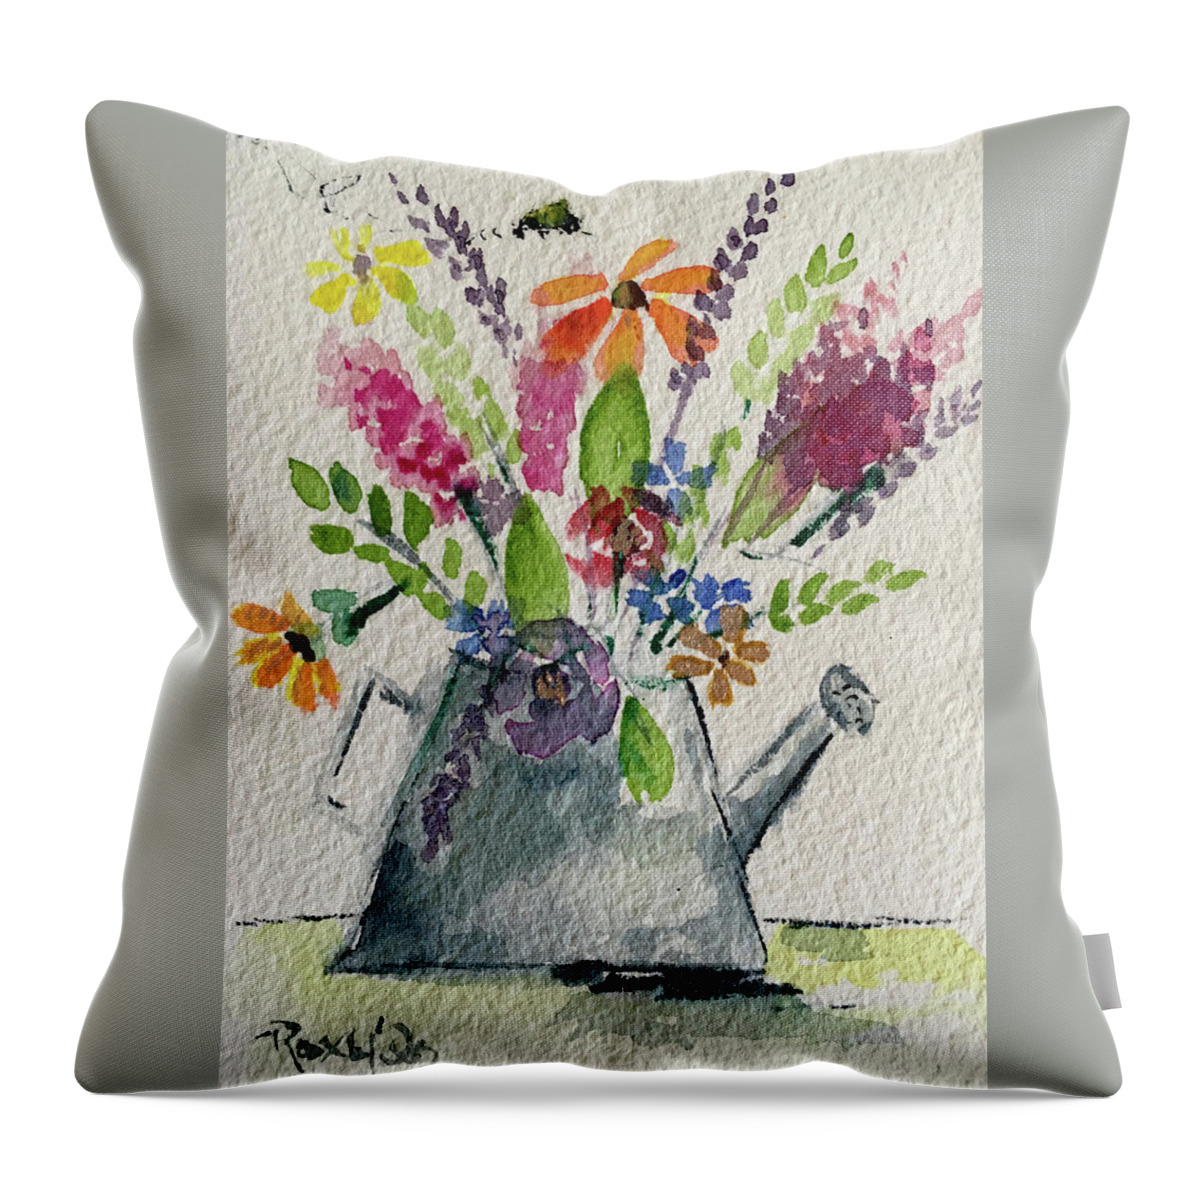 Flowers Throw Pillow featuring the painting Flower Buzz by Roxy Rich